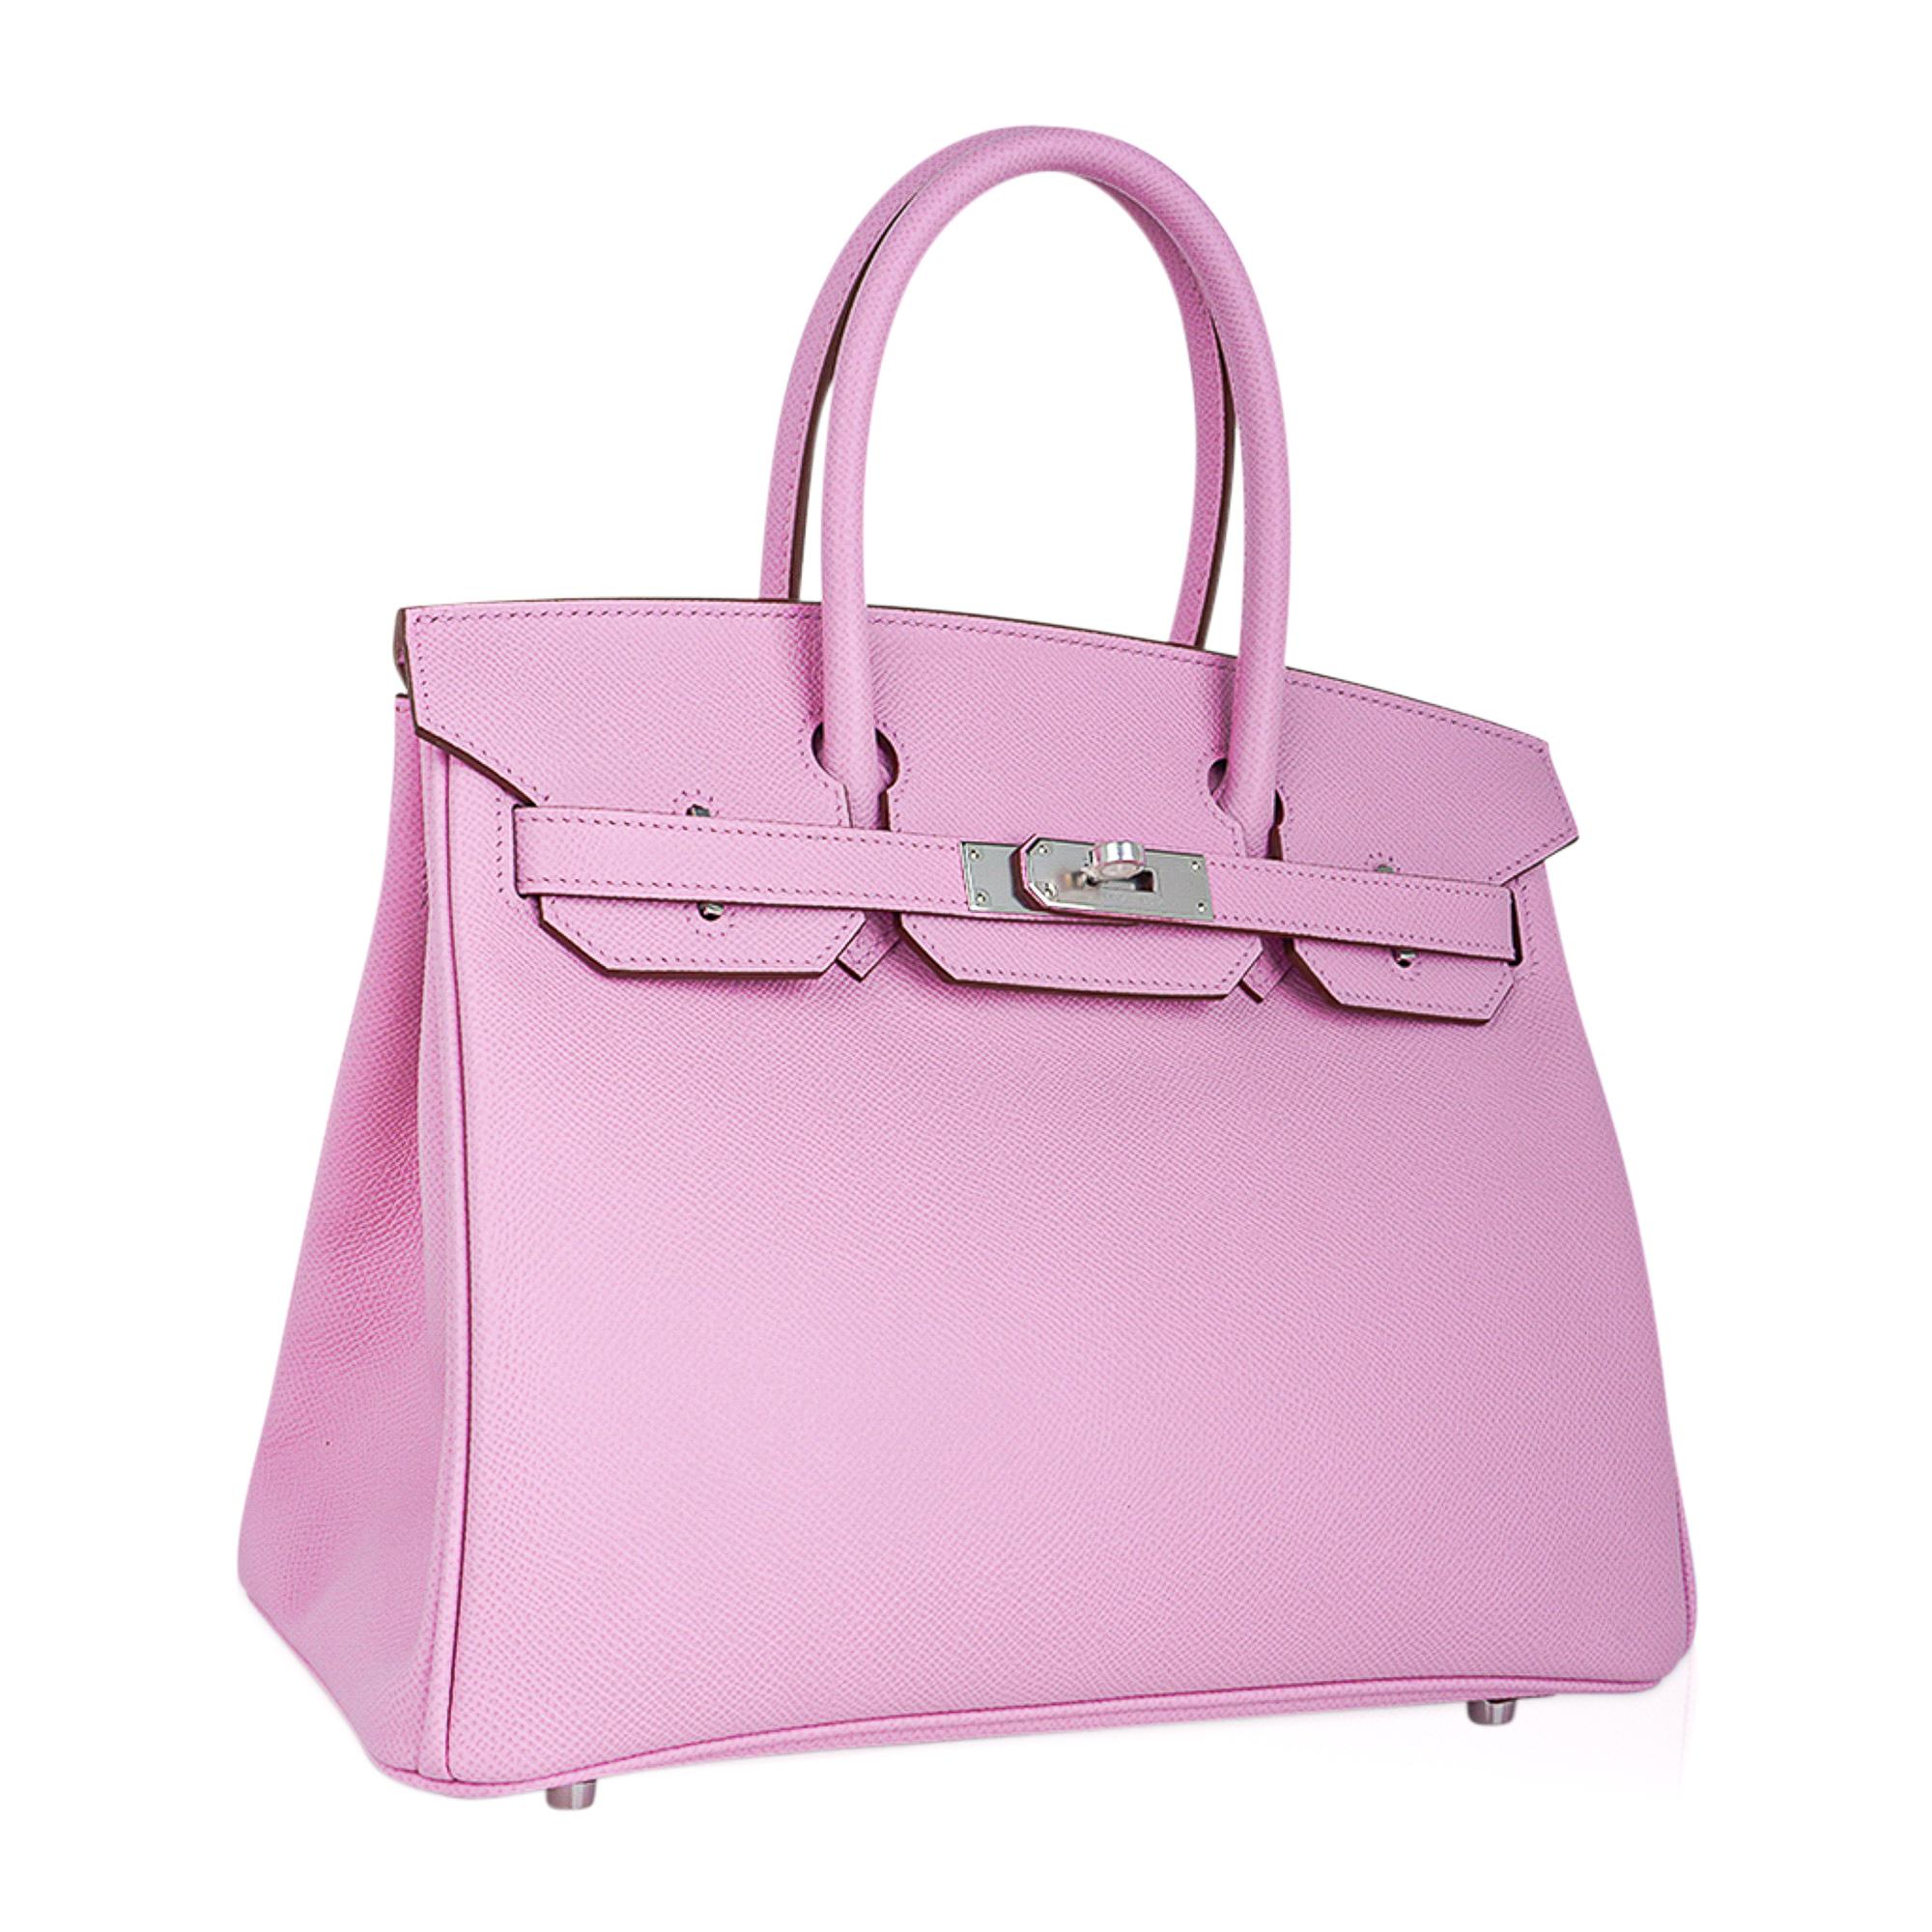 Mightychic offers an Hermes Birkin 30 bag featured in coveted Mauve Sylvestre.
This beautiful Birkin bag is complimented with palladium hardware.
Epsom leather which lends rich saturation of colour.
Comes with the lock and keys in the clochette,